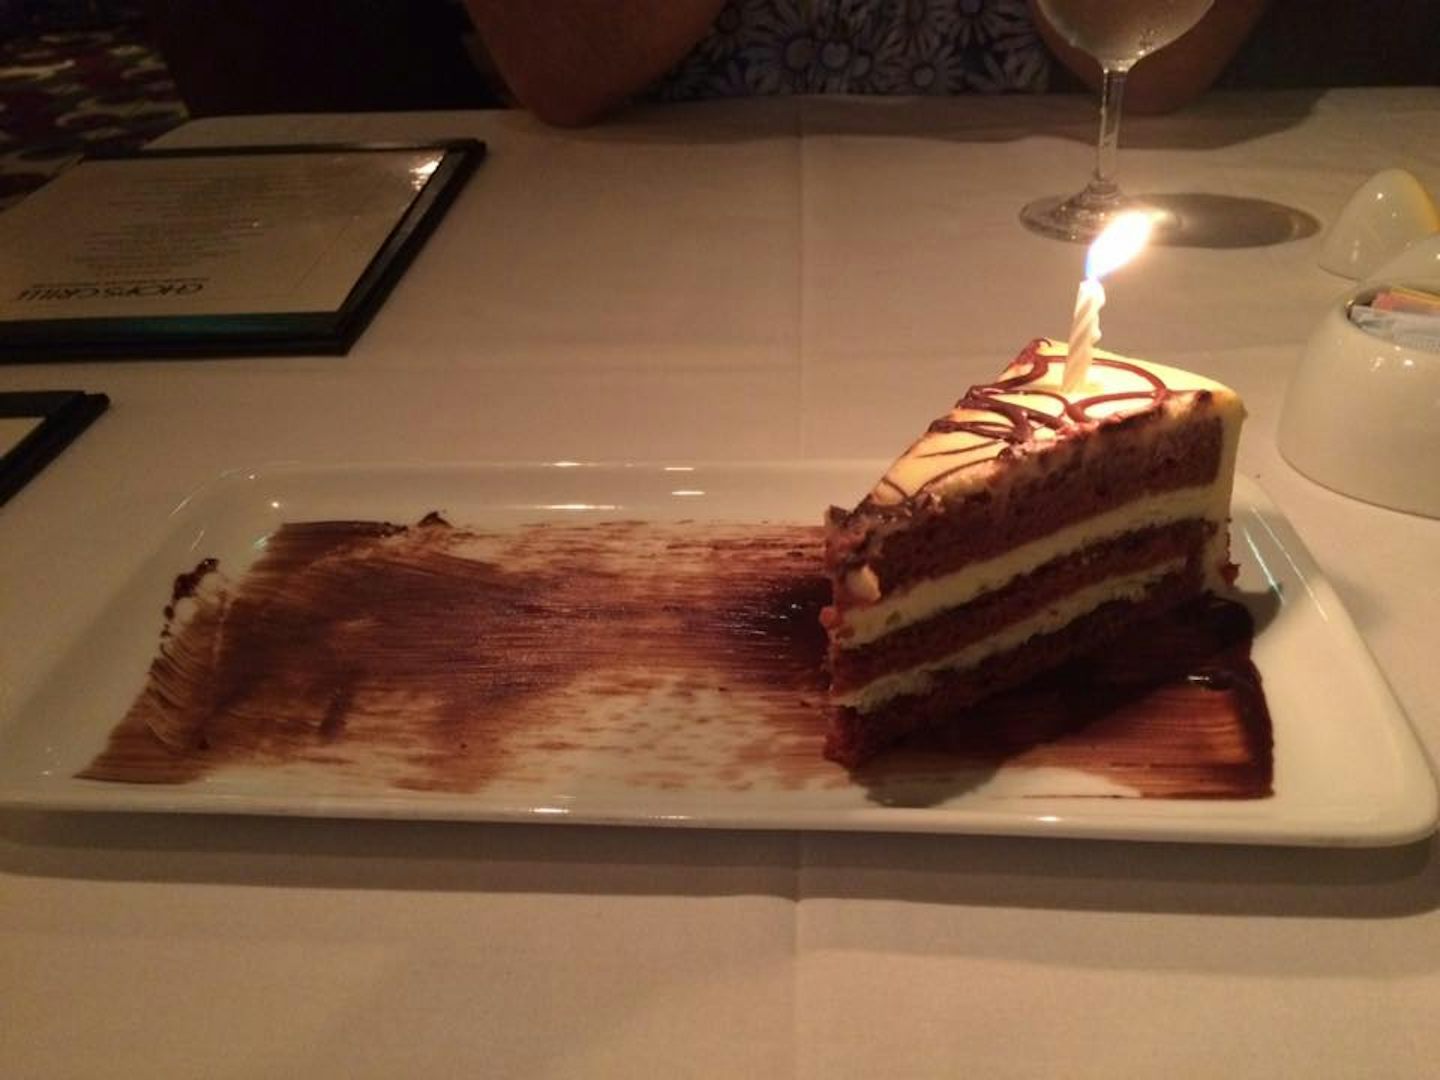 A birthday treat (and song) from the waitstaff at Chops Grille.